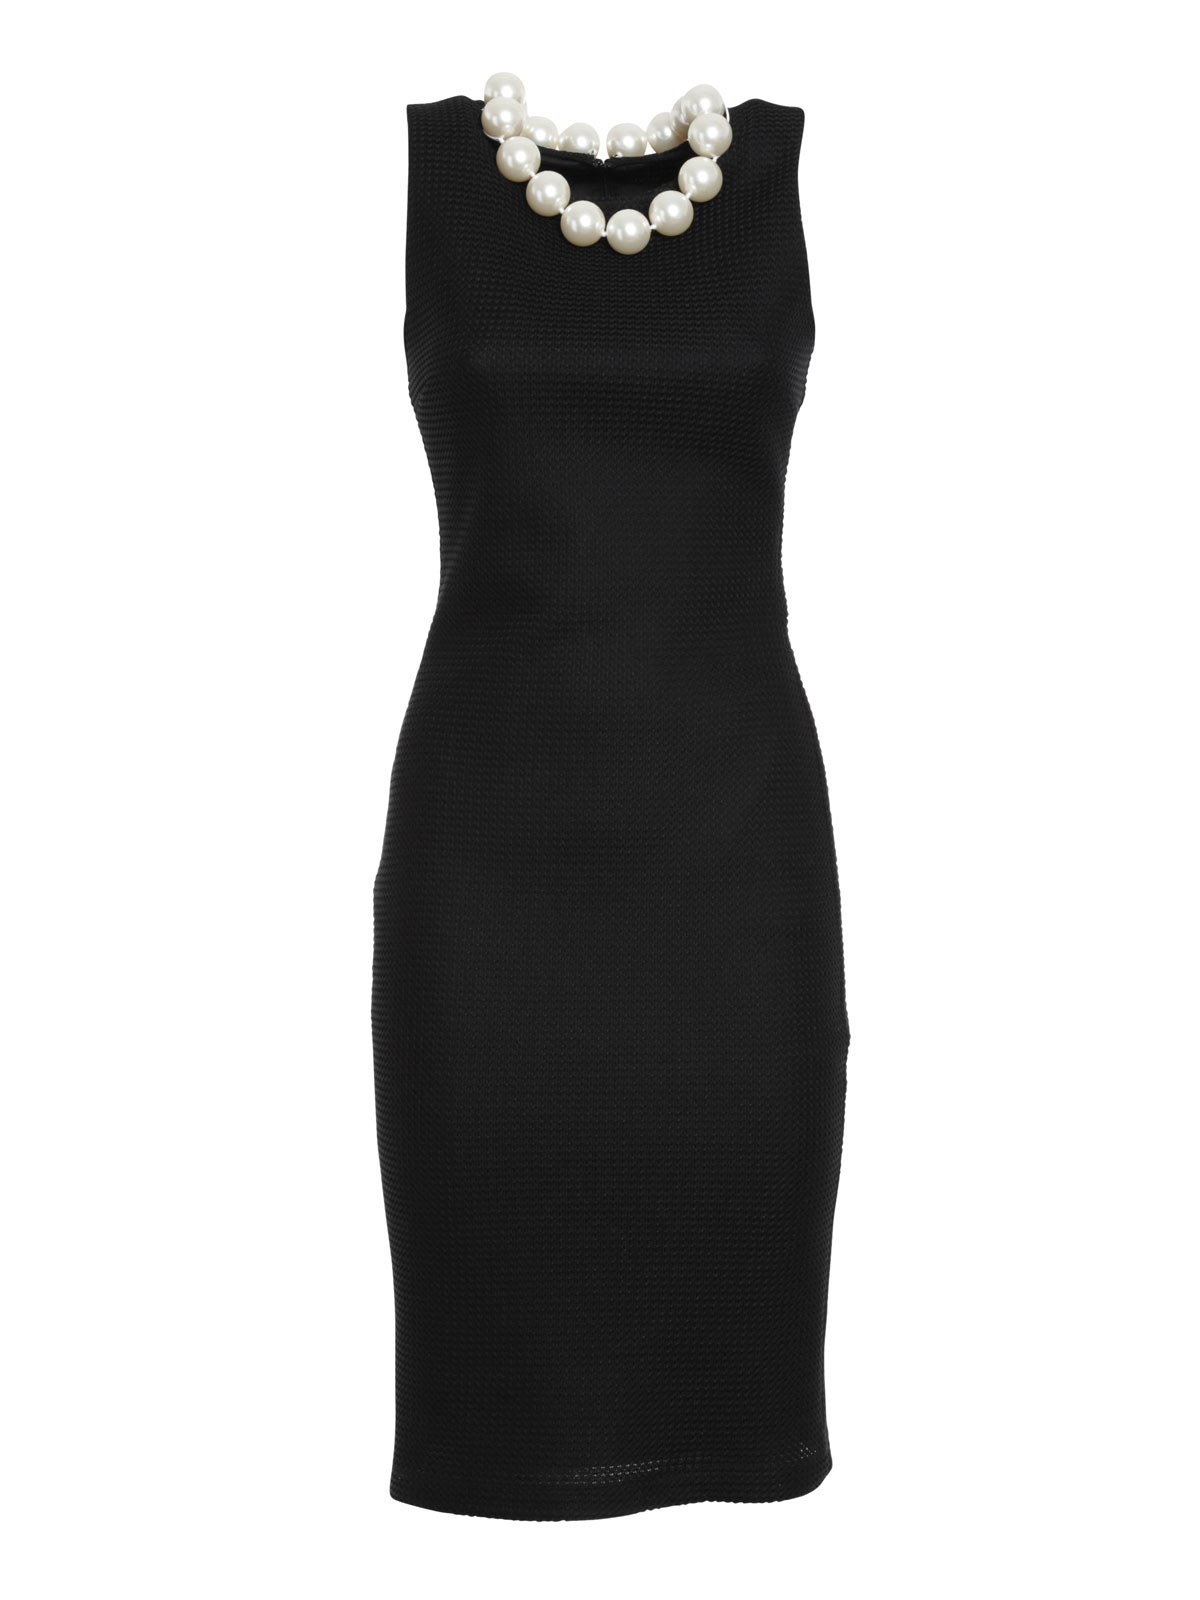 Moschino Boutique - Dress with pearl 